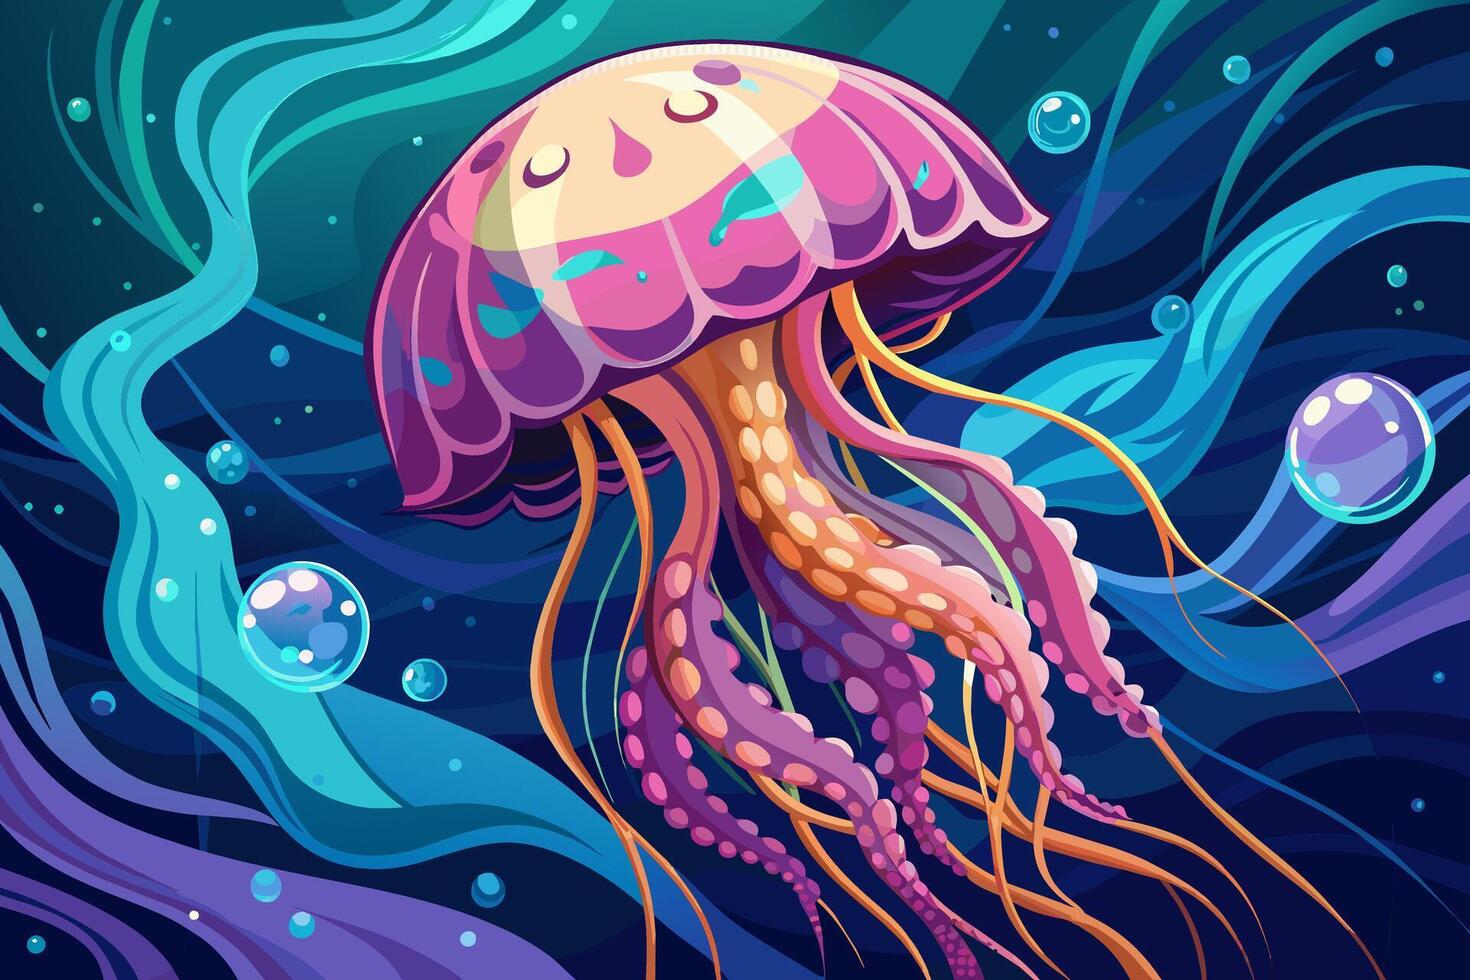 Jellyfish with flowing tentacles swimming in the ocean. Concept of ocean animal, sea creature. Graphic illustration. Print vector